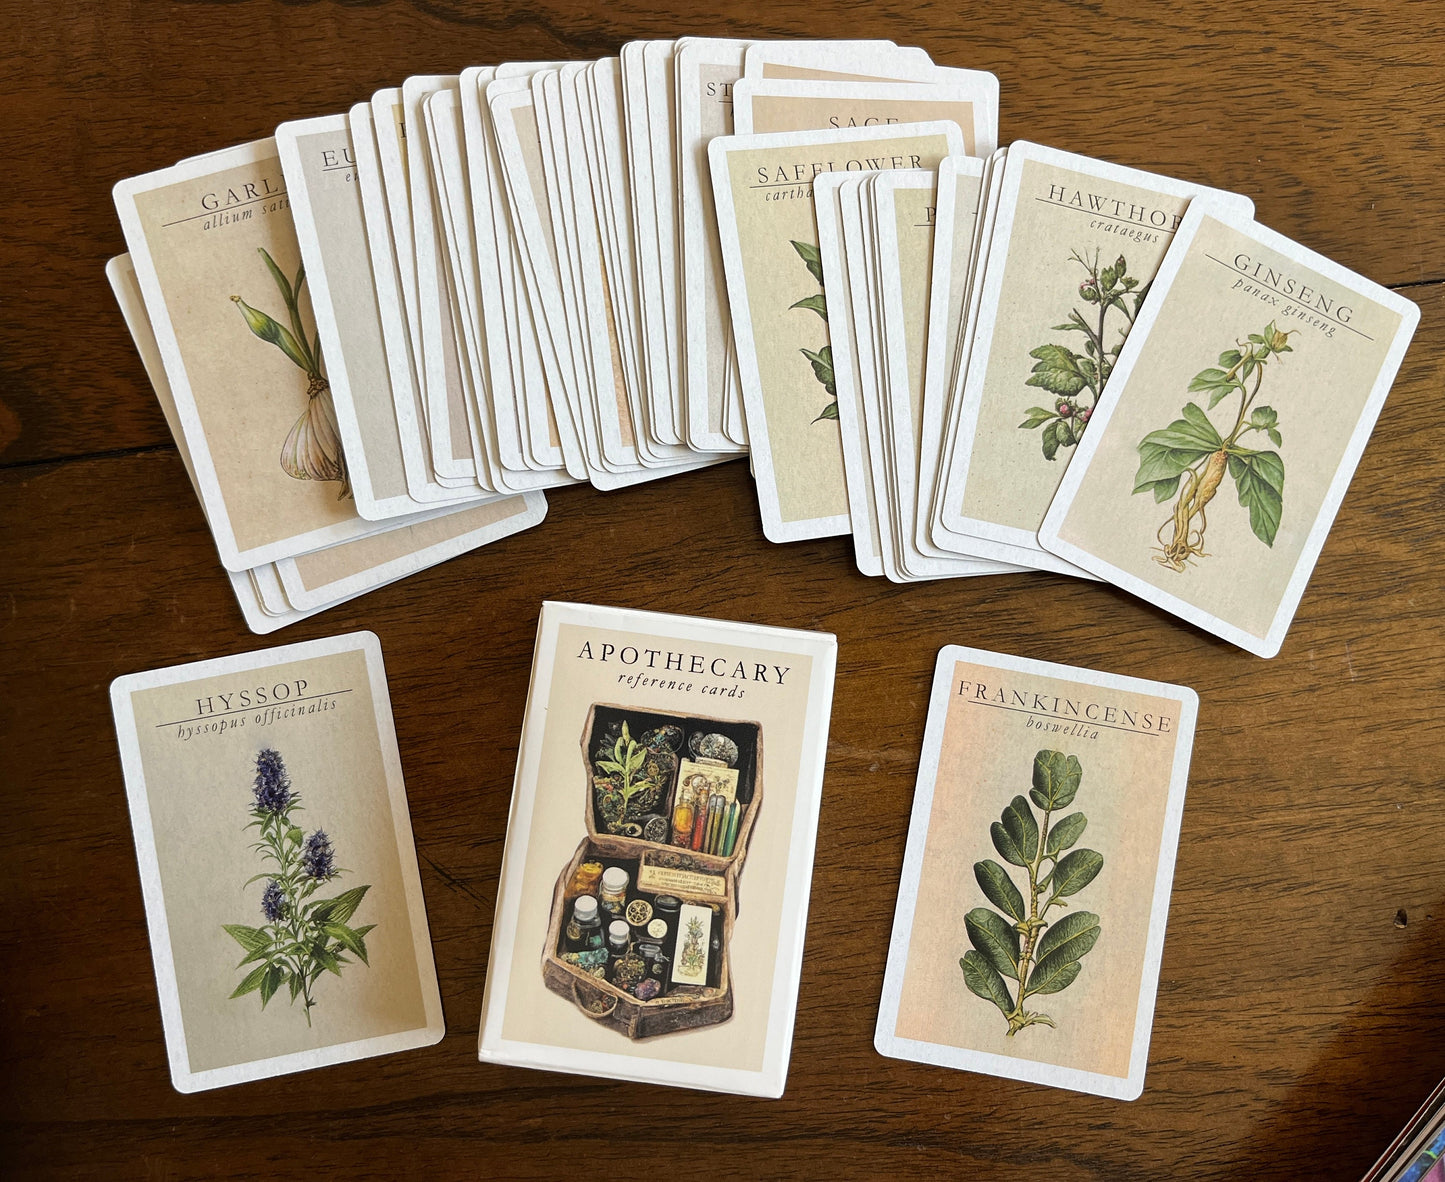 apothecary reference cards ~ herbal index flash cards ~ medicinal herbarium ~ wicca witchcraft supplies ~ information